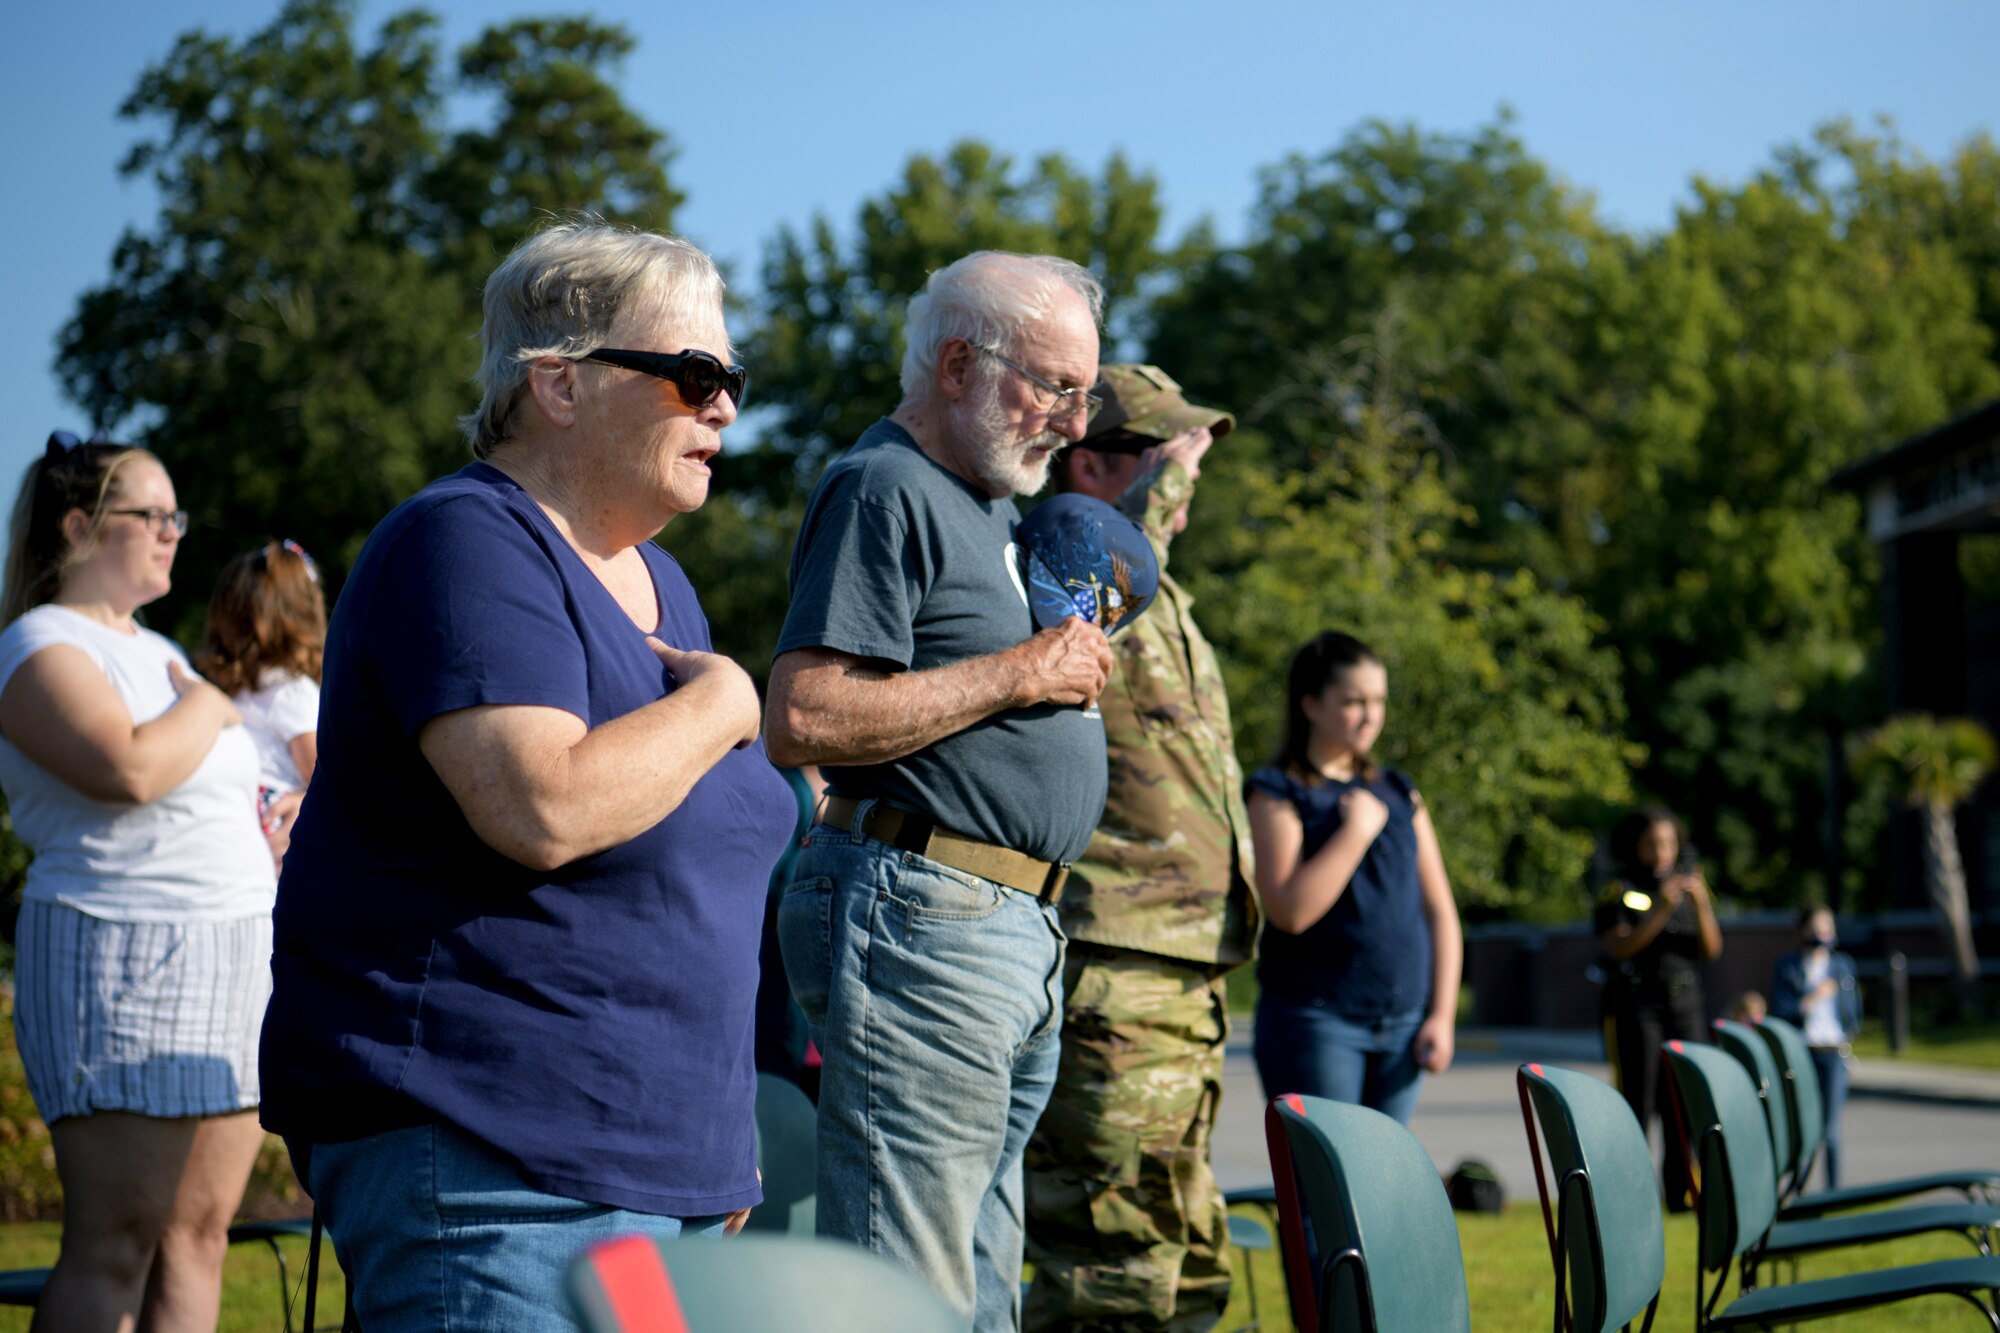 Susan Scouten, a resident of Sumter, left, sings along to the national anthem during a 9/11 memorial ceremony in Sumter, S.C., Sept. 11, 2021. The ceremony was held in remembrance of the 20th anniversary of the Sept. 11, 2001, attacks across the United States. (U.S. Air Force photo by Staff Sgt. K. Tucker Owen)